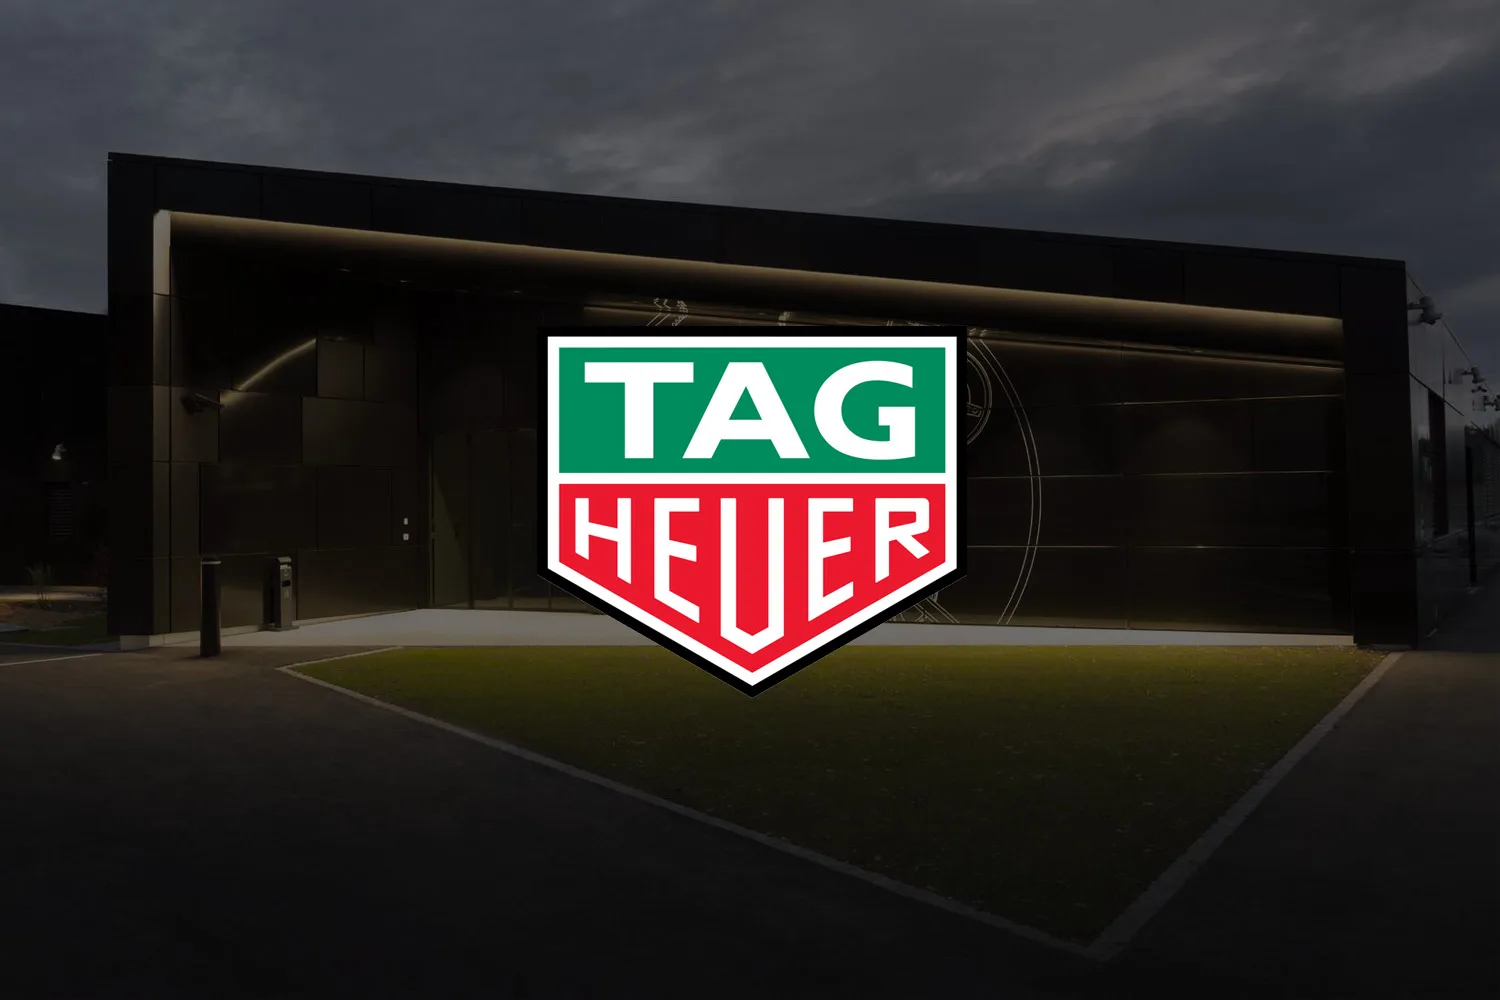 10 things you (probably) didn't know about TAG Heuer